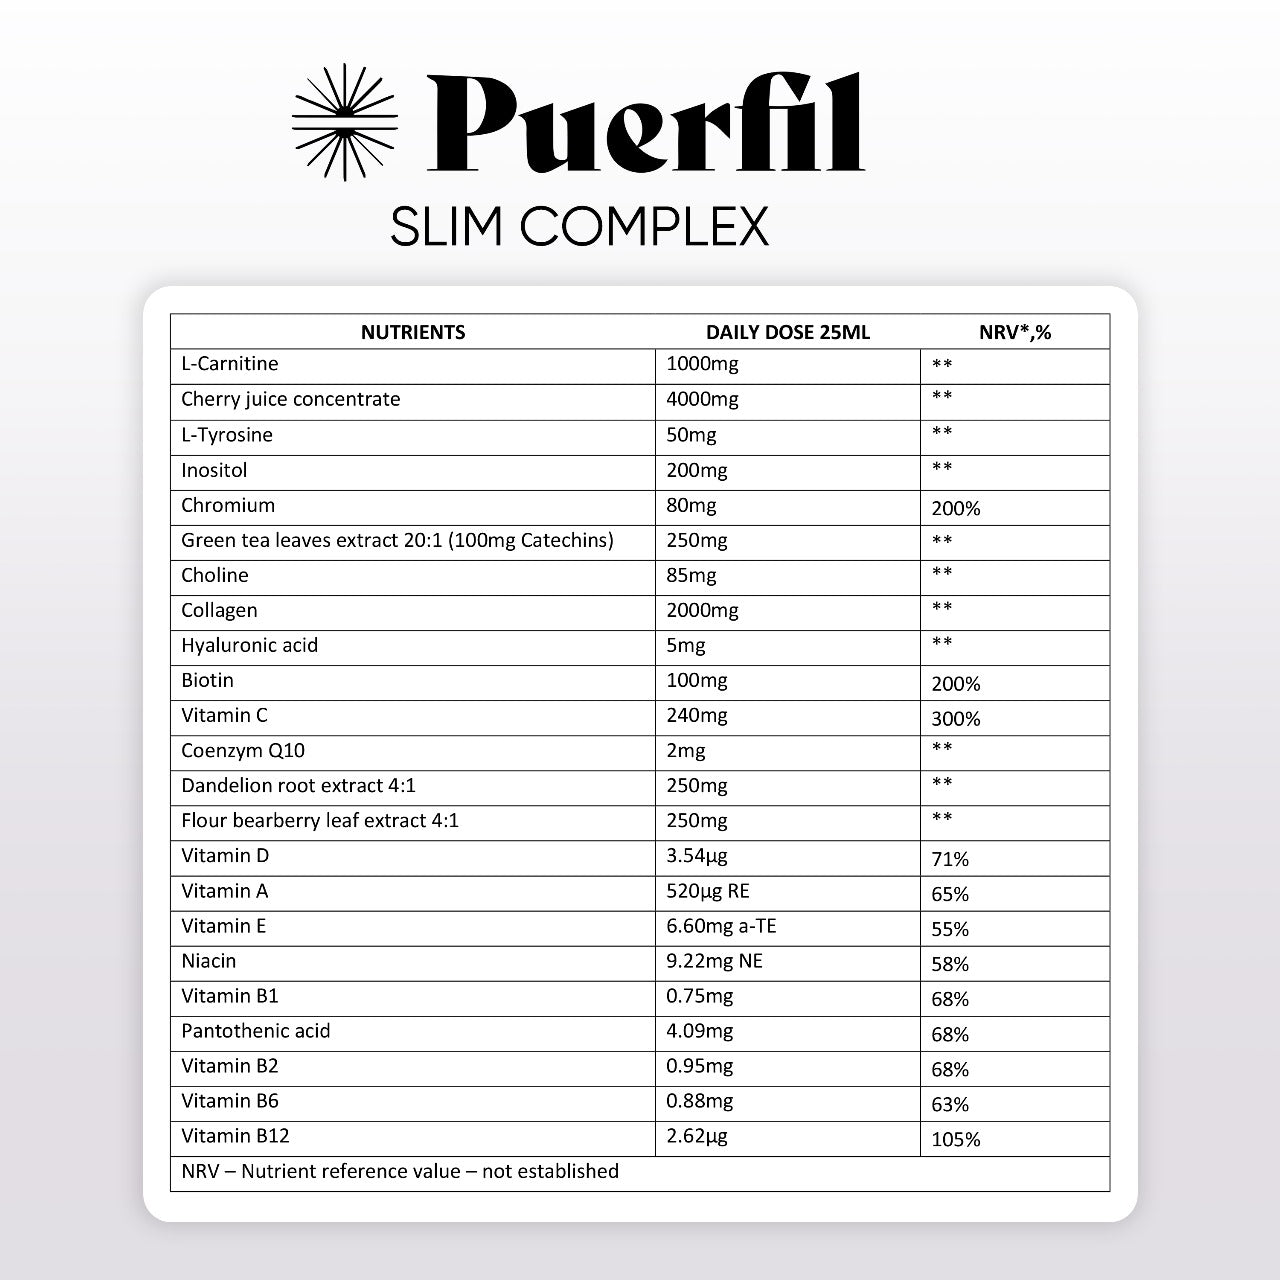 BUY PUERFIL SLIM COMPLEX AND GET 2 GIFTS